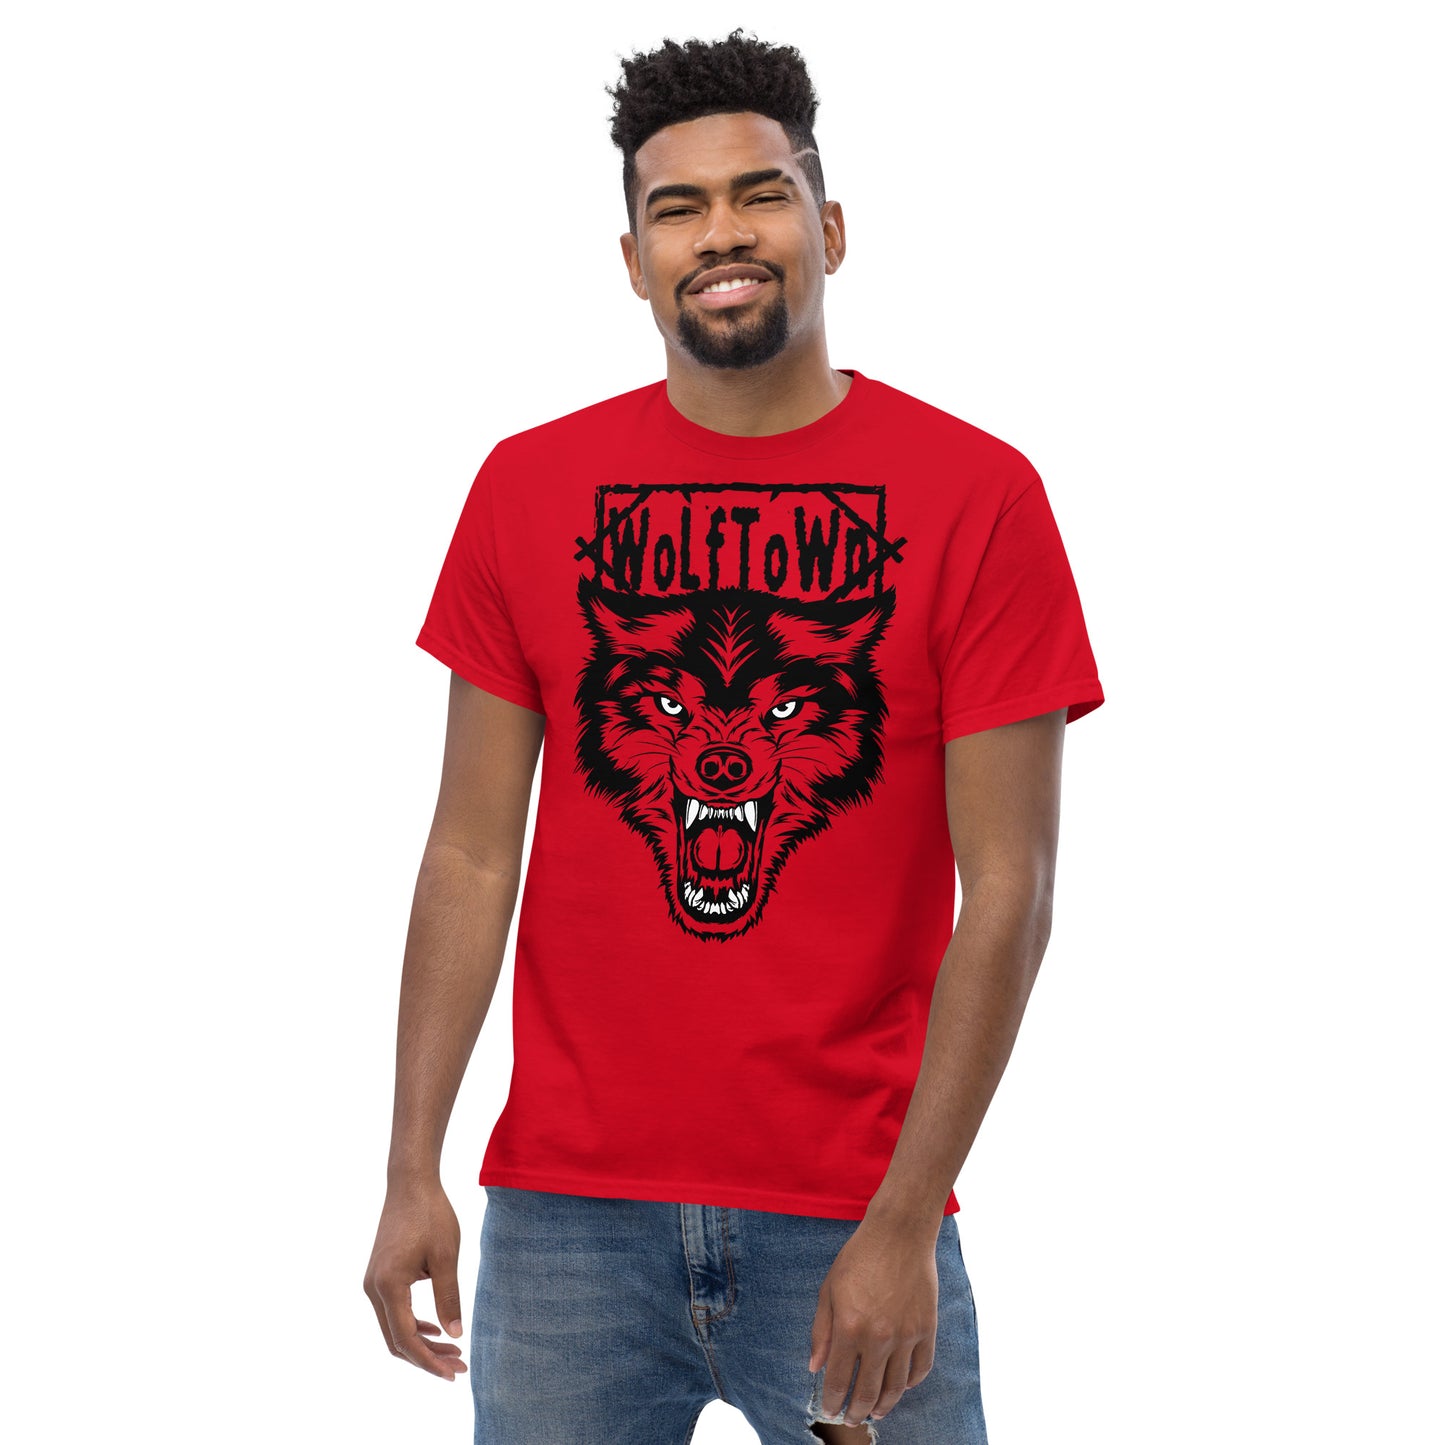 WOLFTOWN 'WOLFPAC' (Classic T-Shirt)